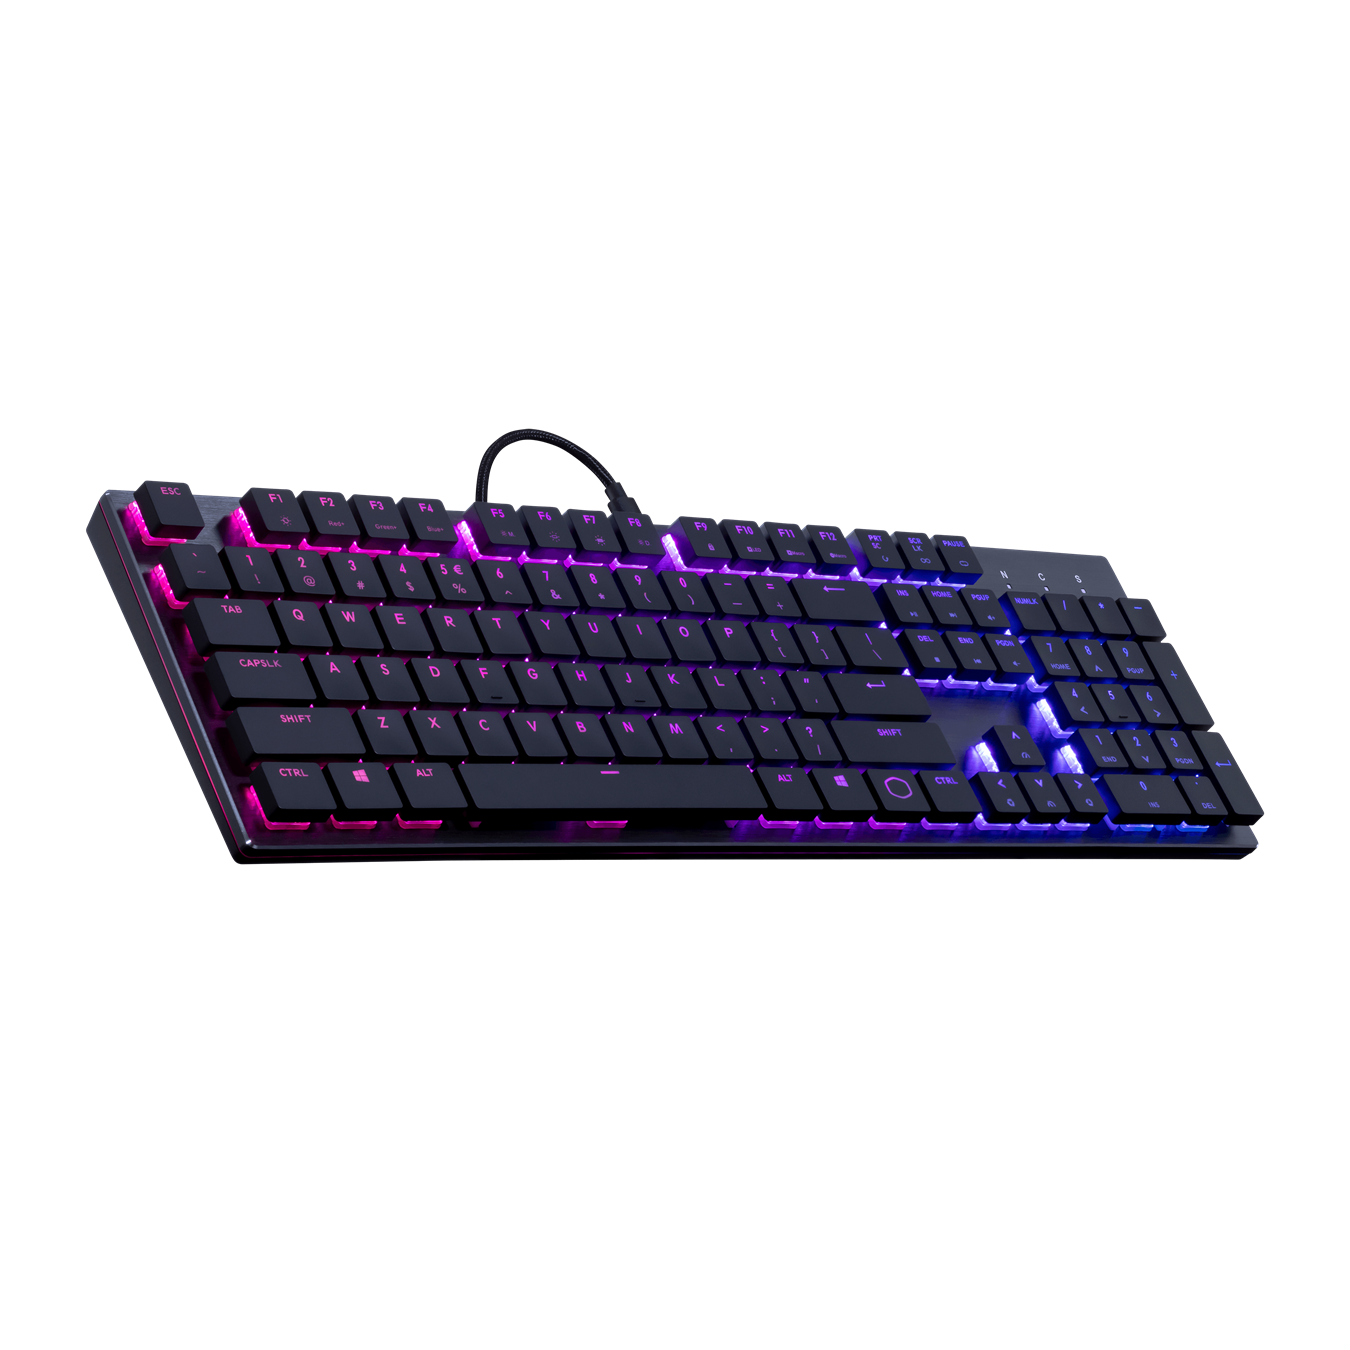 SK650 Low Profile RGB Mechanical Gaming Keyboard - Cherry MX Low Profile Switches